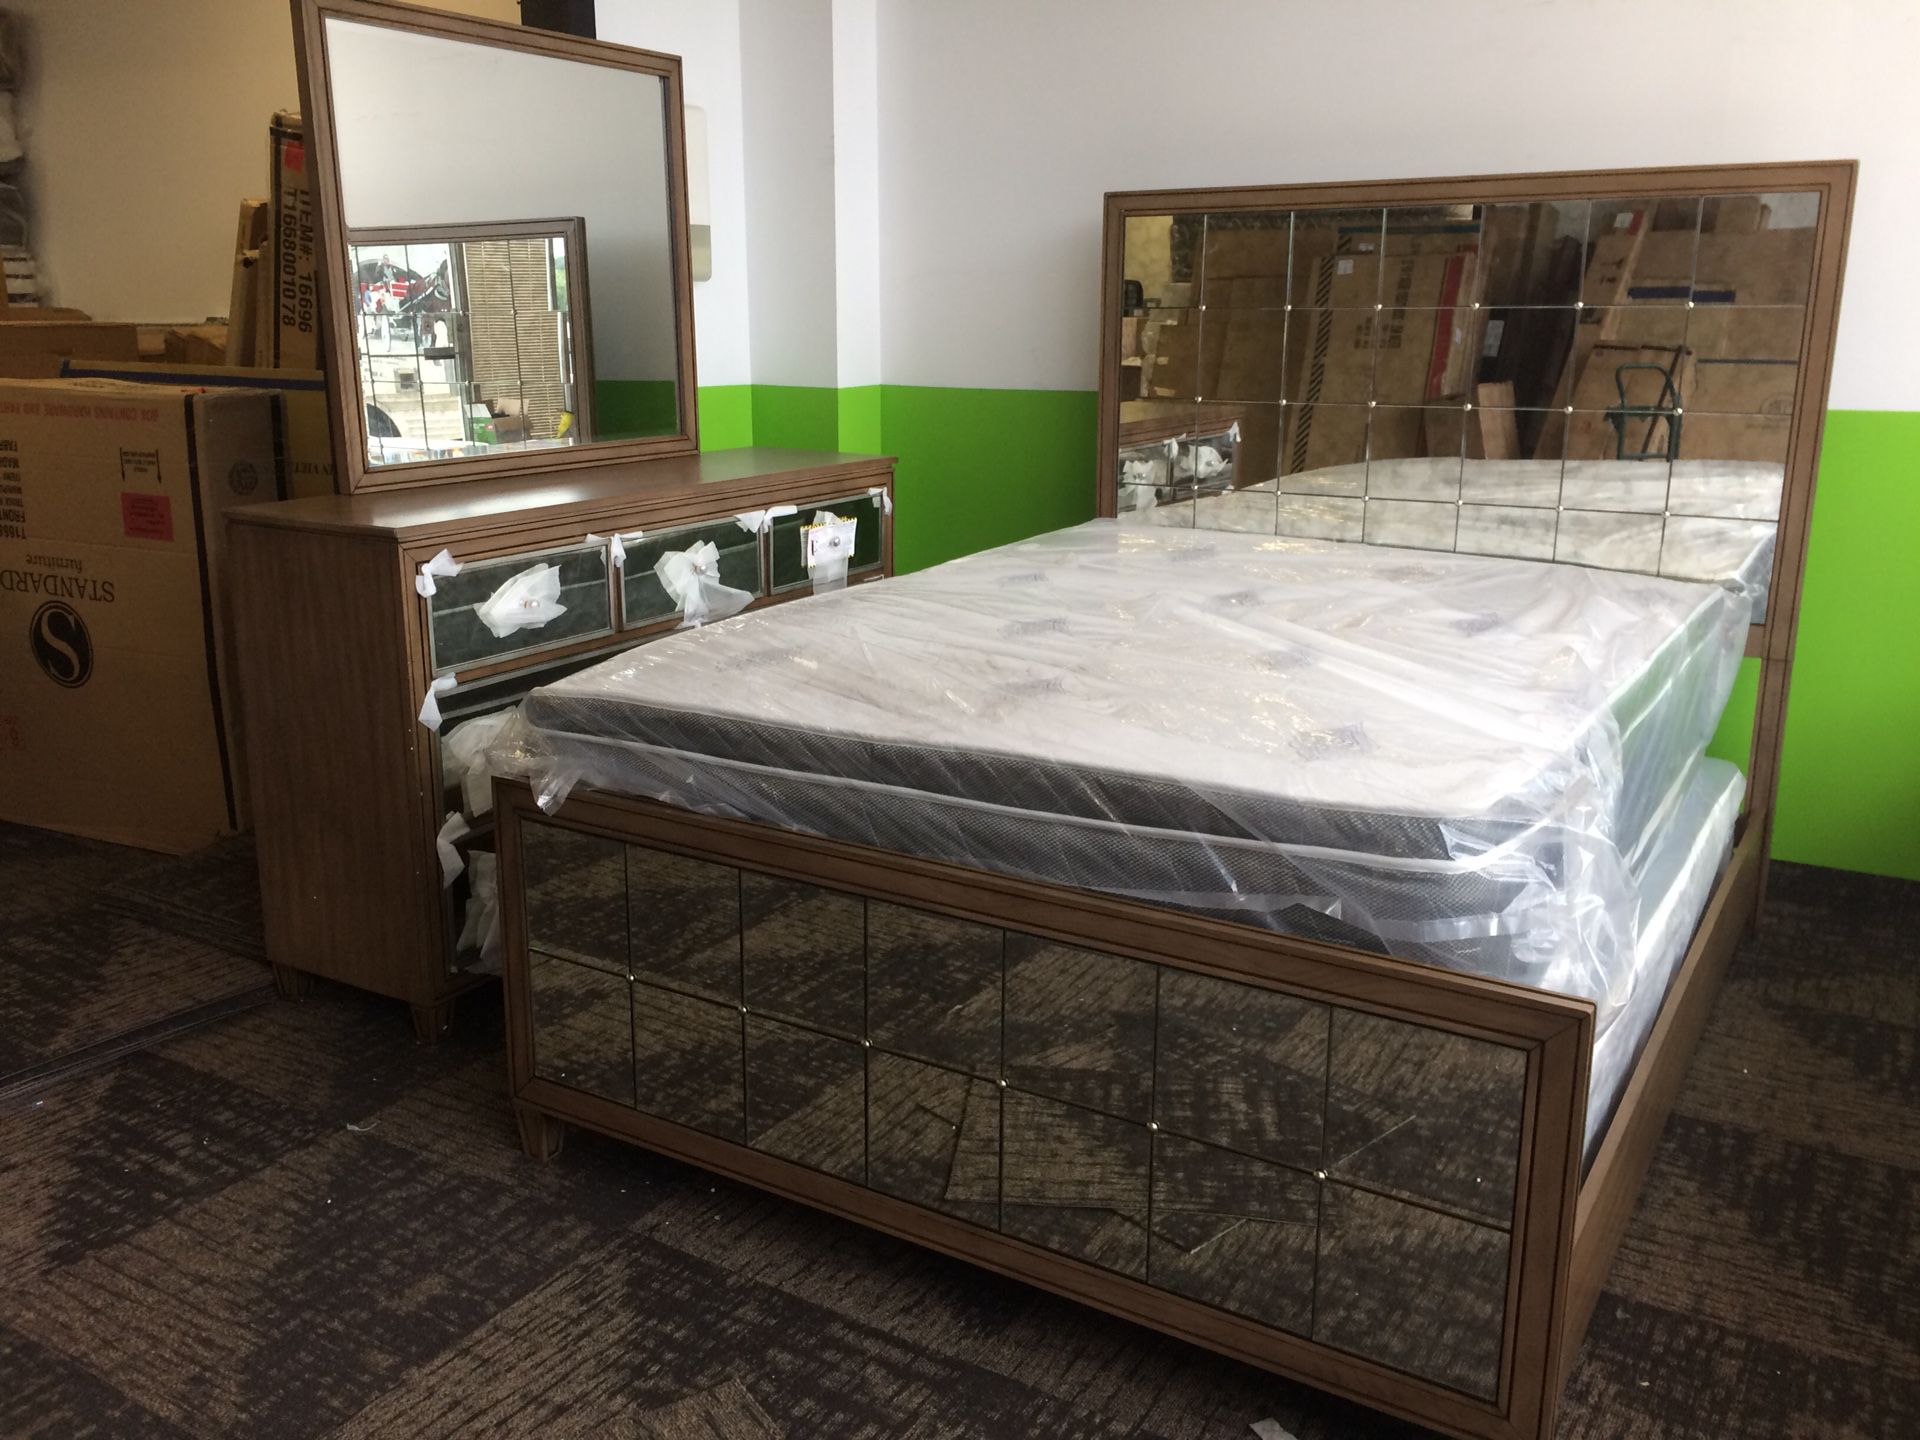 Brand new mirrored queen bed frame